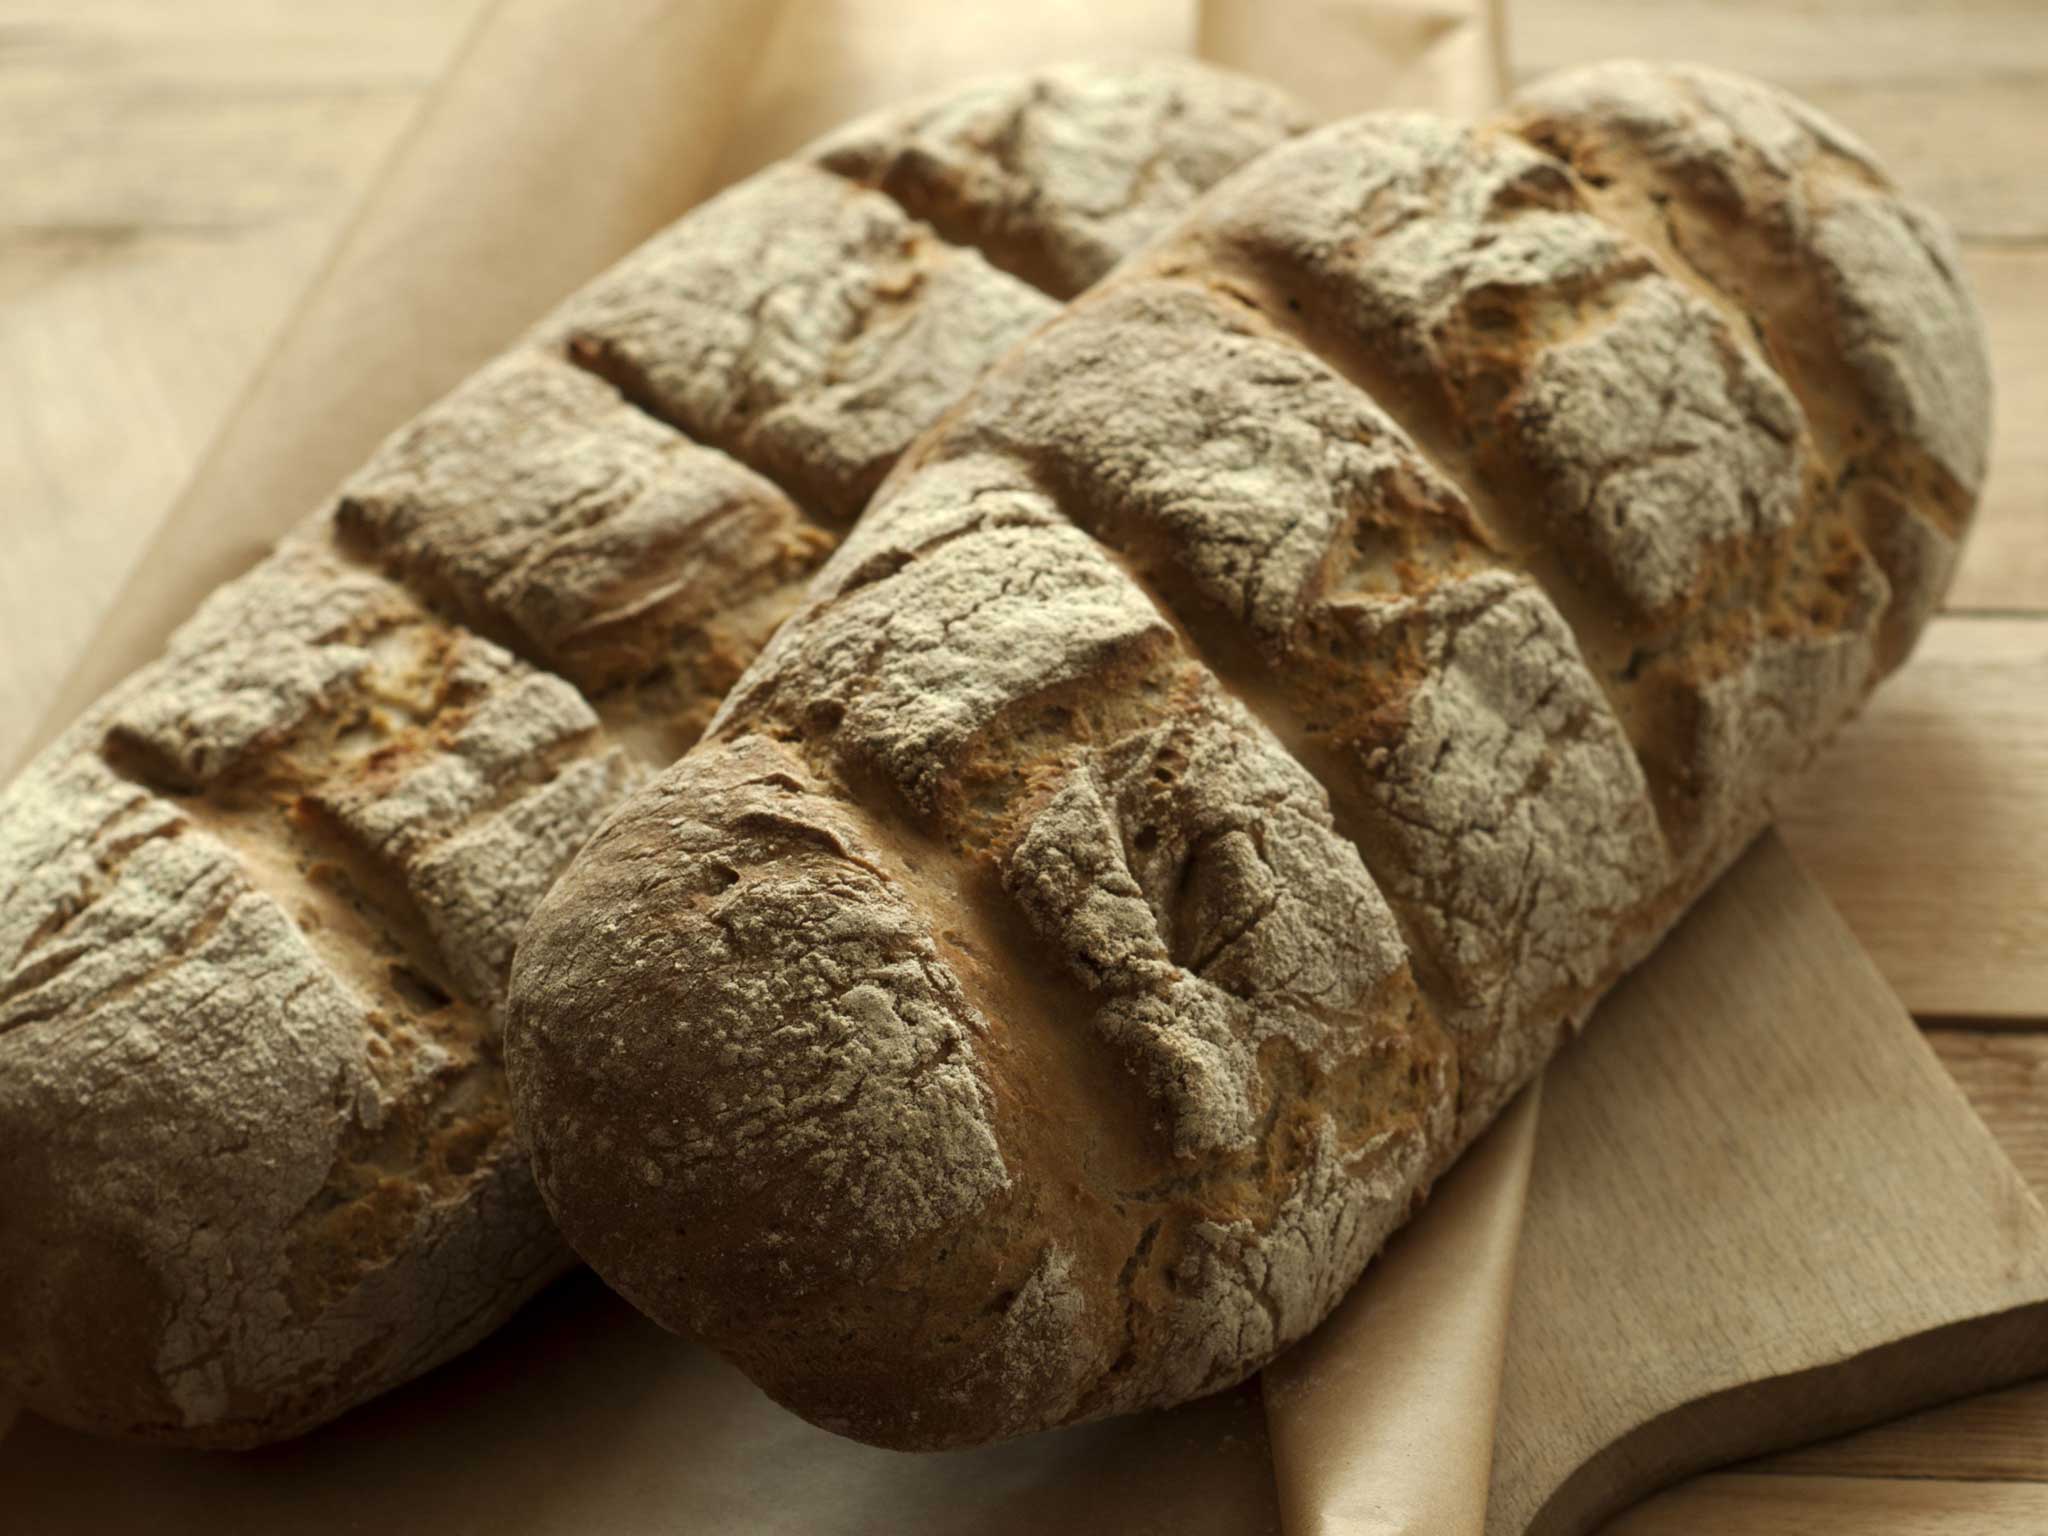 Breaking bread: baking can help with depression